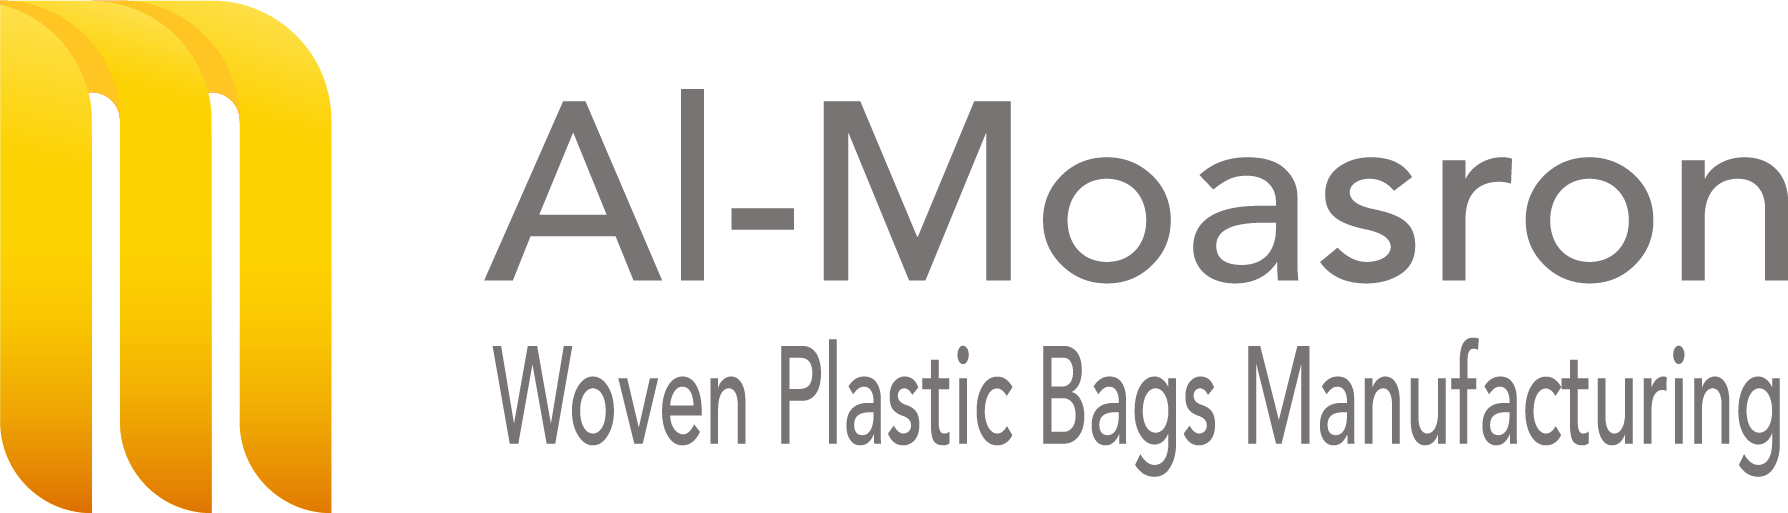 Woven Plastic Bags Manufacturing